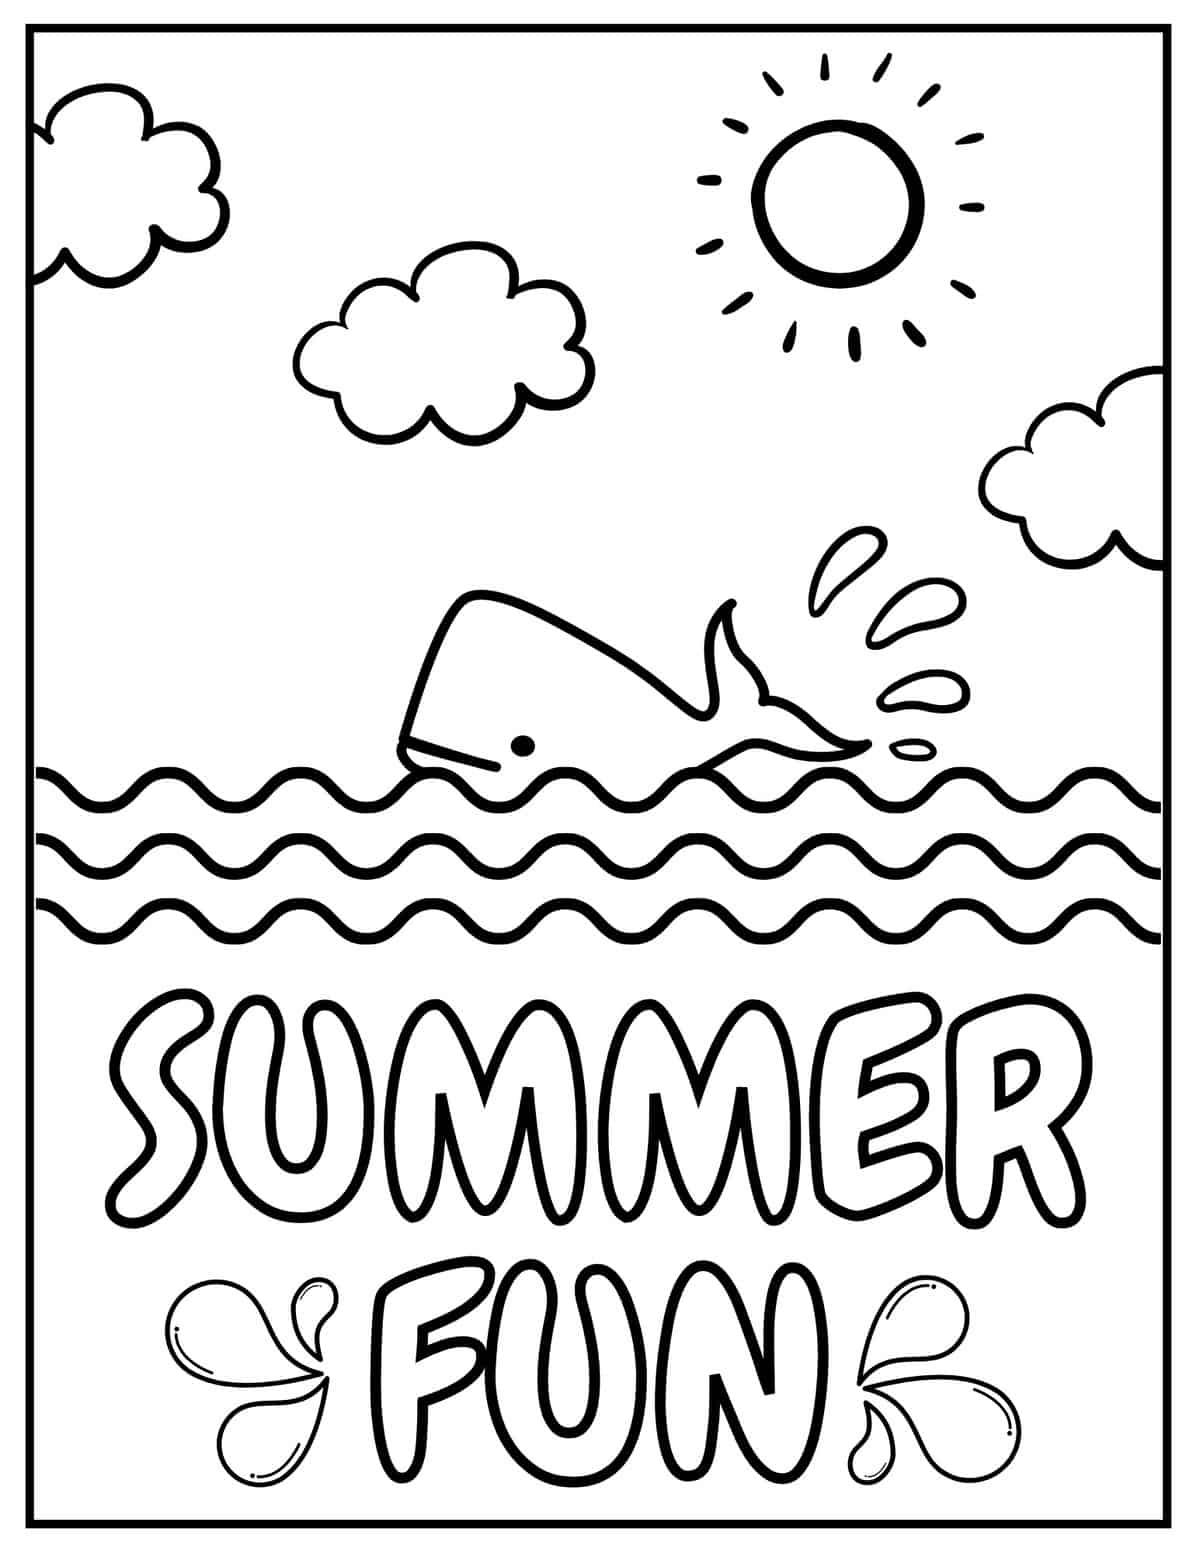 Coloring Book for Toddlers - 100 Easy And Fun Coloring Pages For